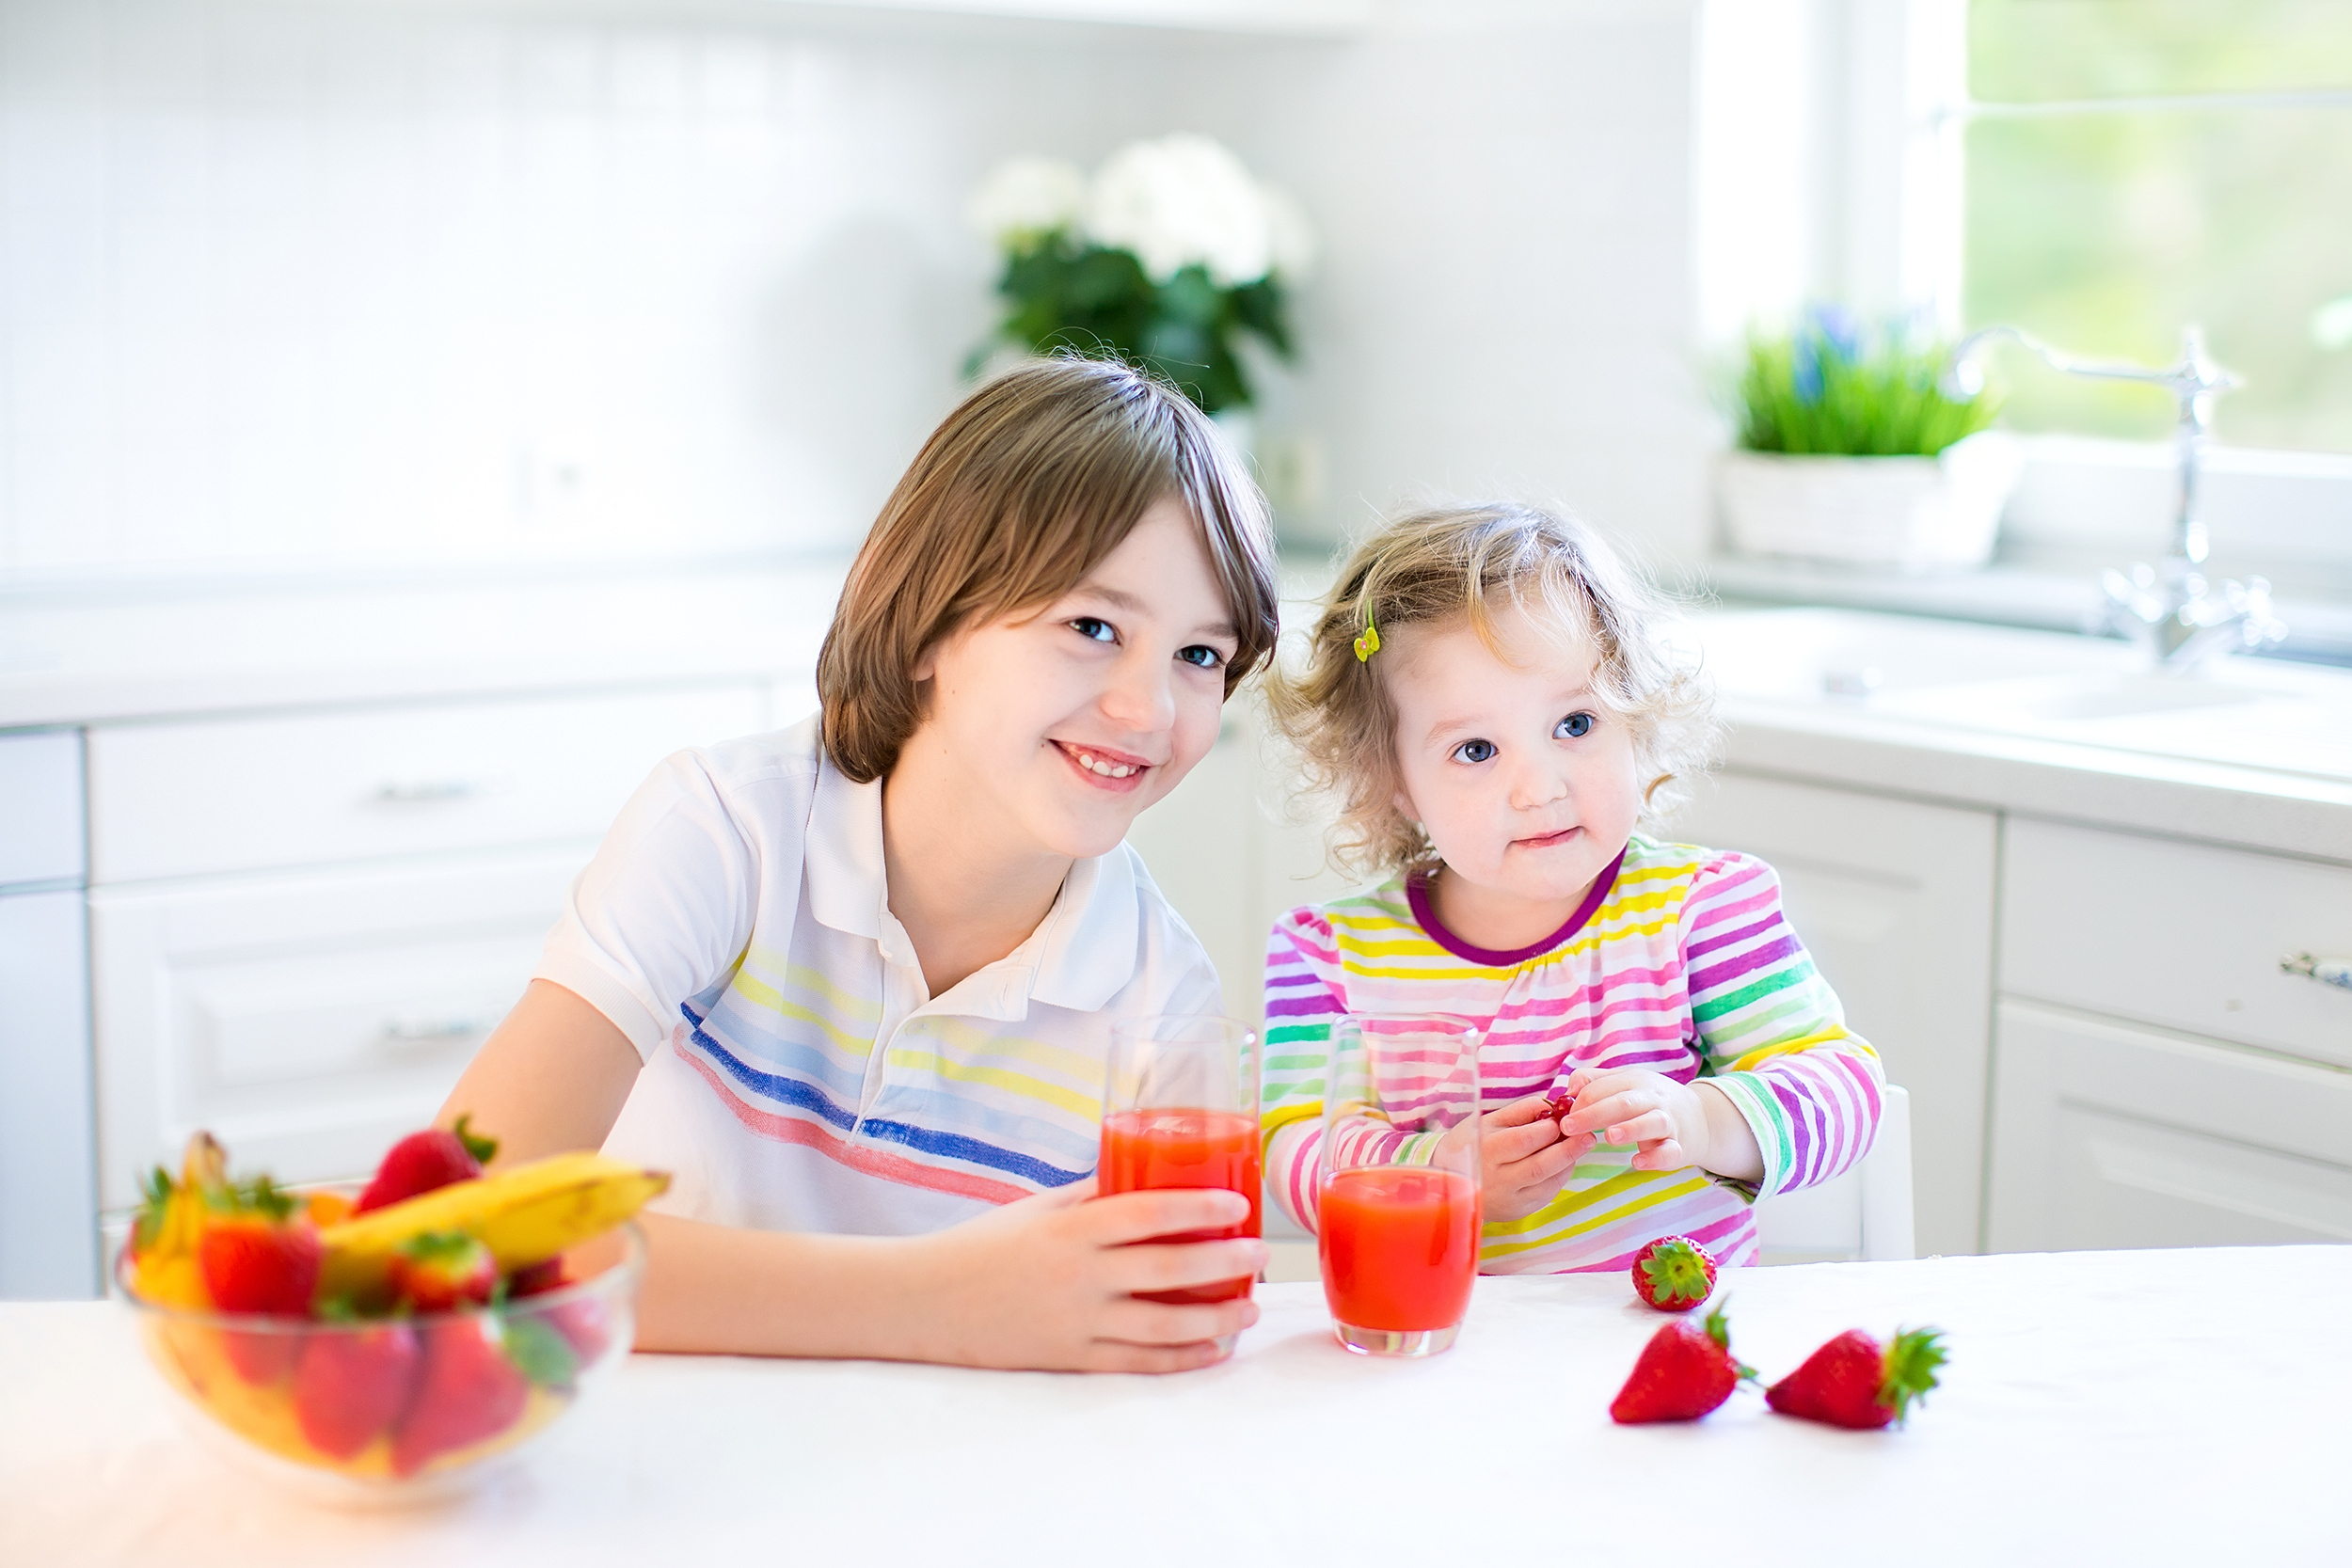 New Study Links Fruit Juice to Weight Gain in Children and Adults